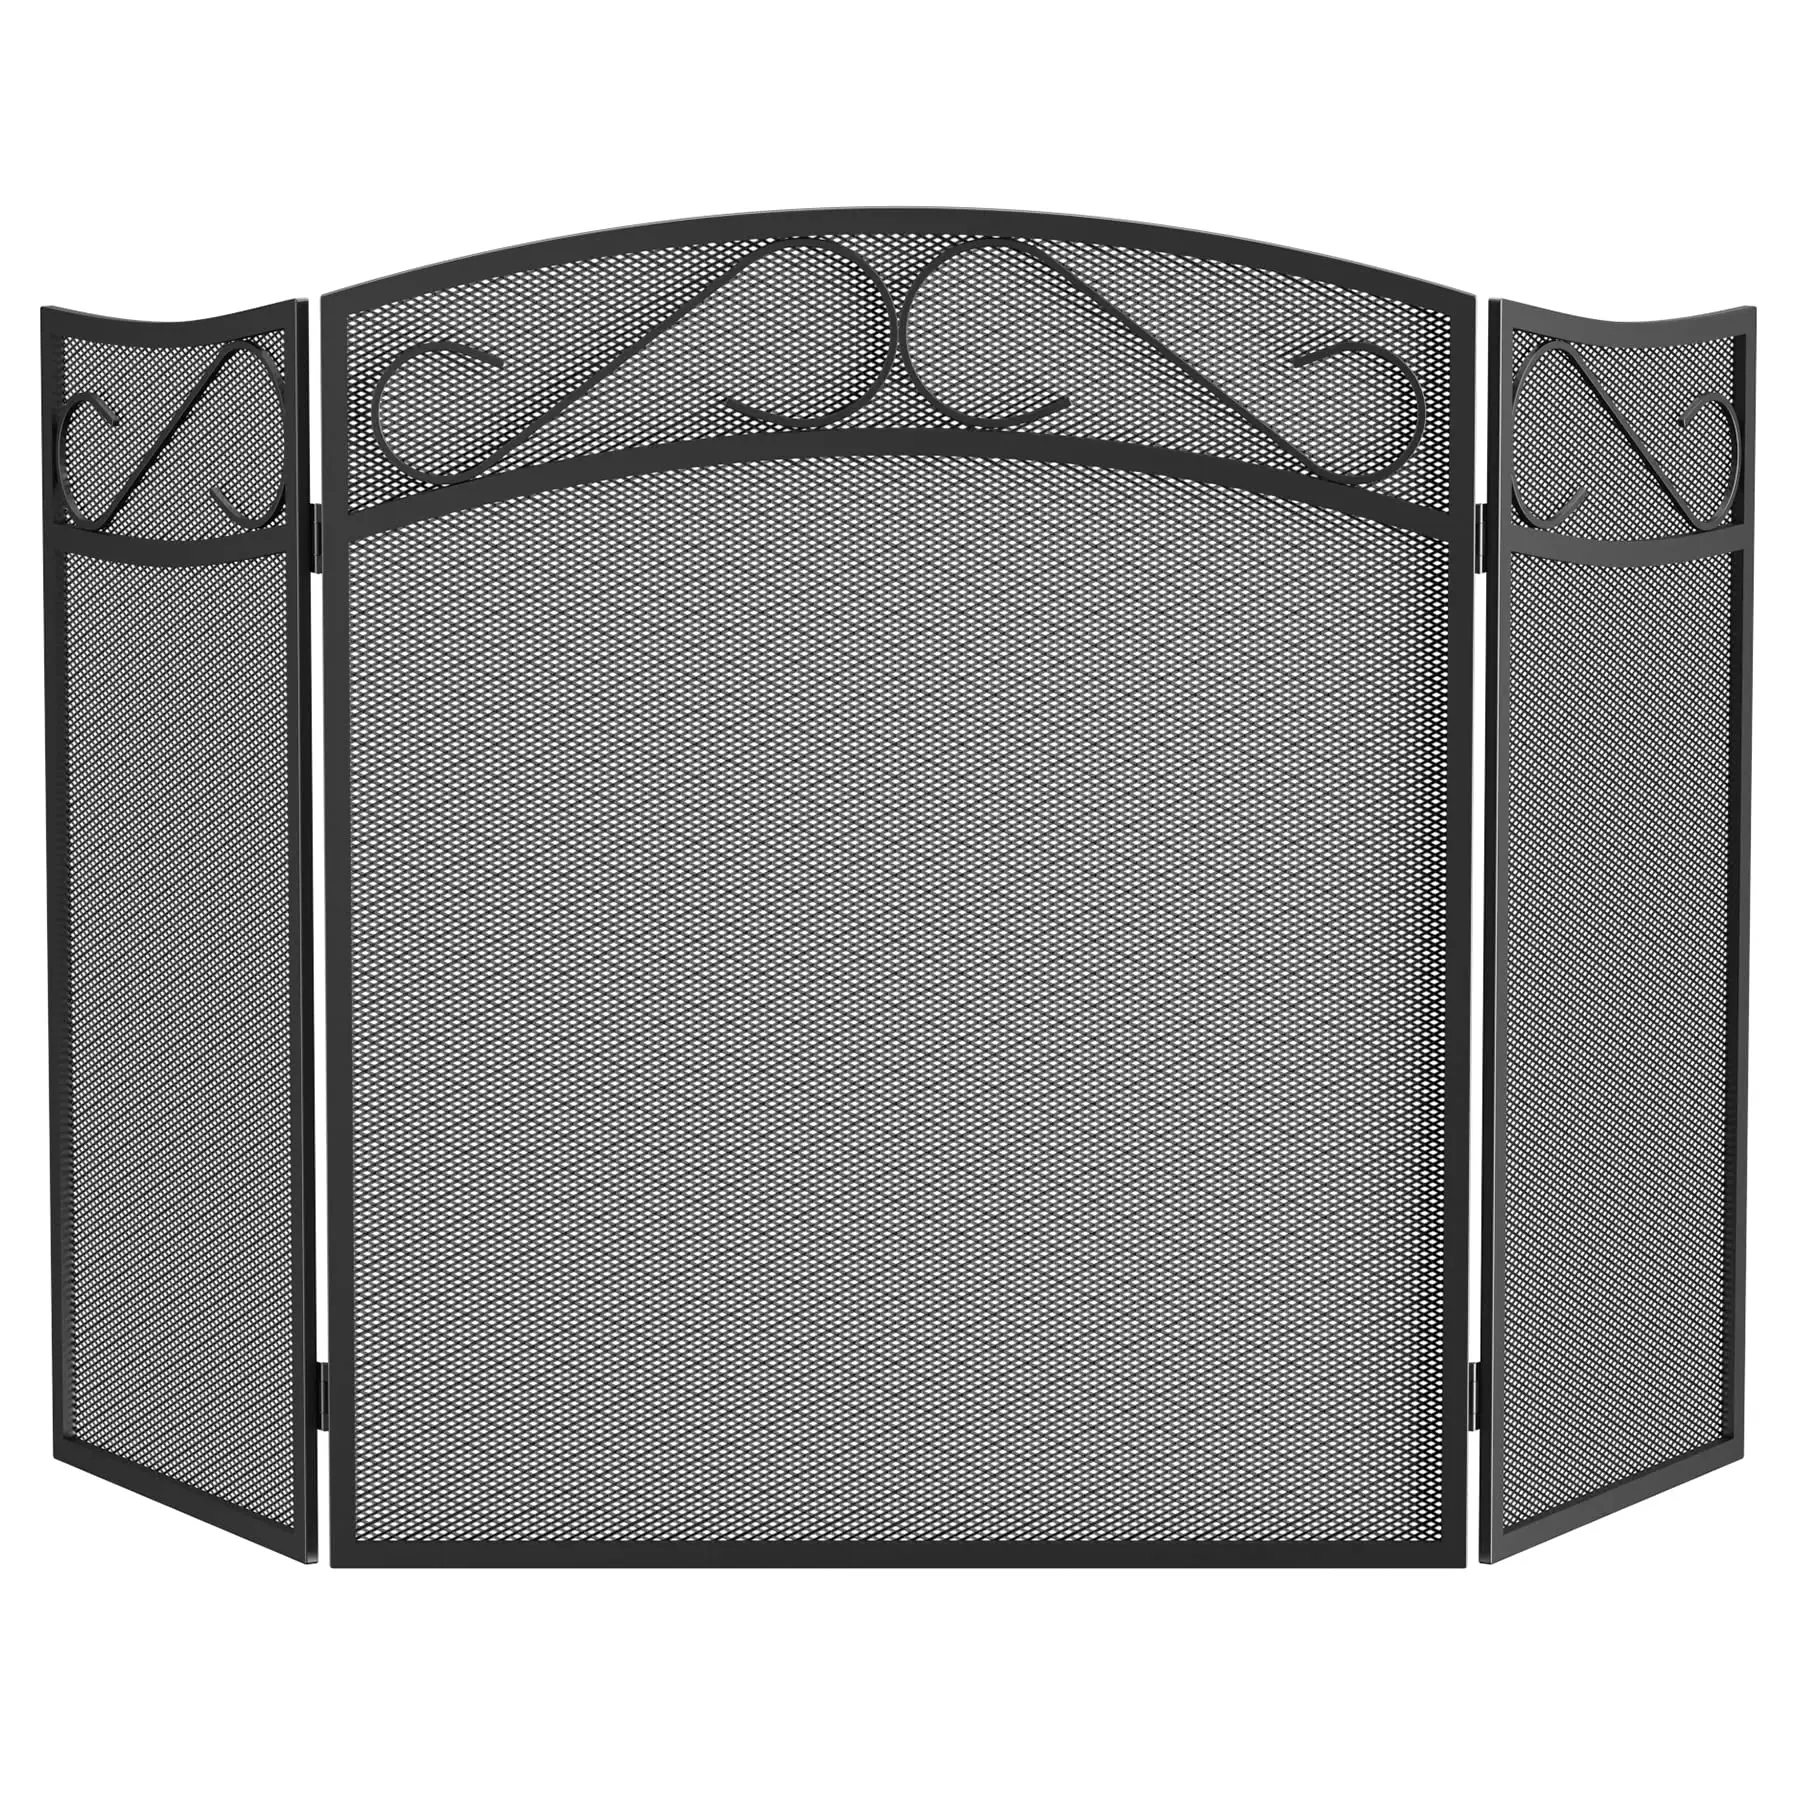 Indoor Fireplace Screen 3 Panel Iron Outdoor Metal Decorative Mesh Cover Fireplace Panels Fire Spark Guard - Black